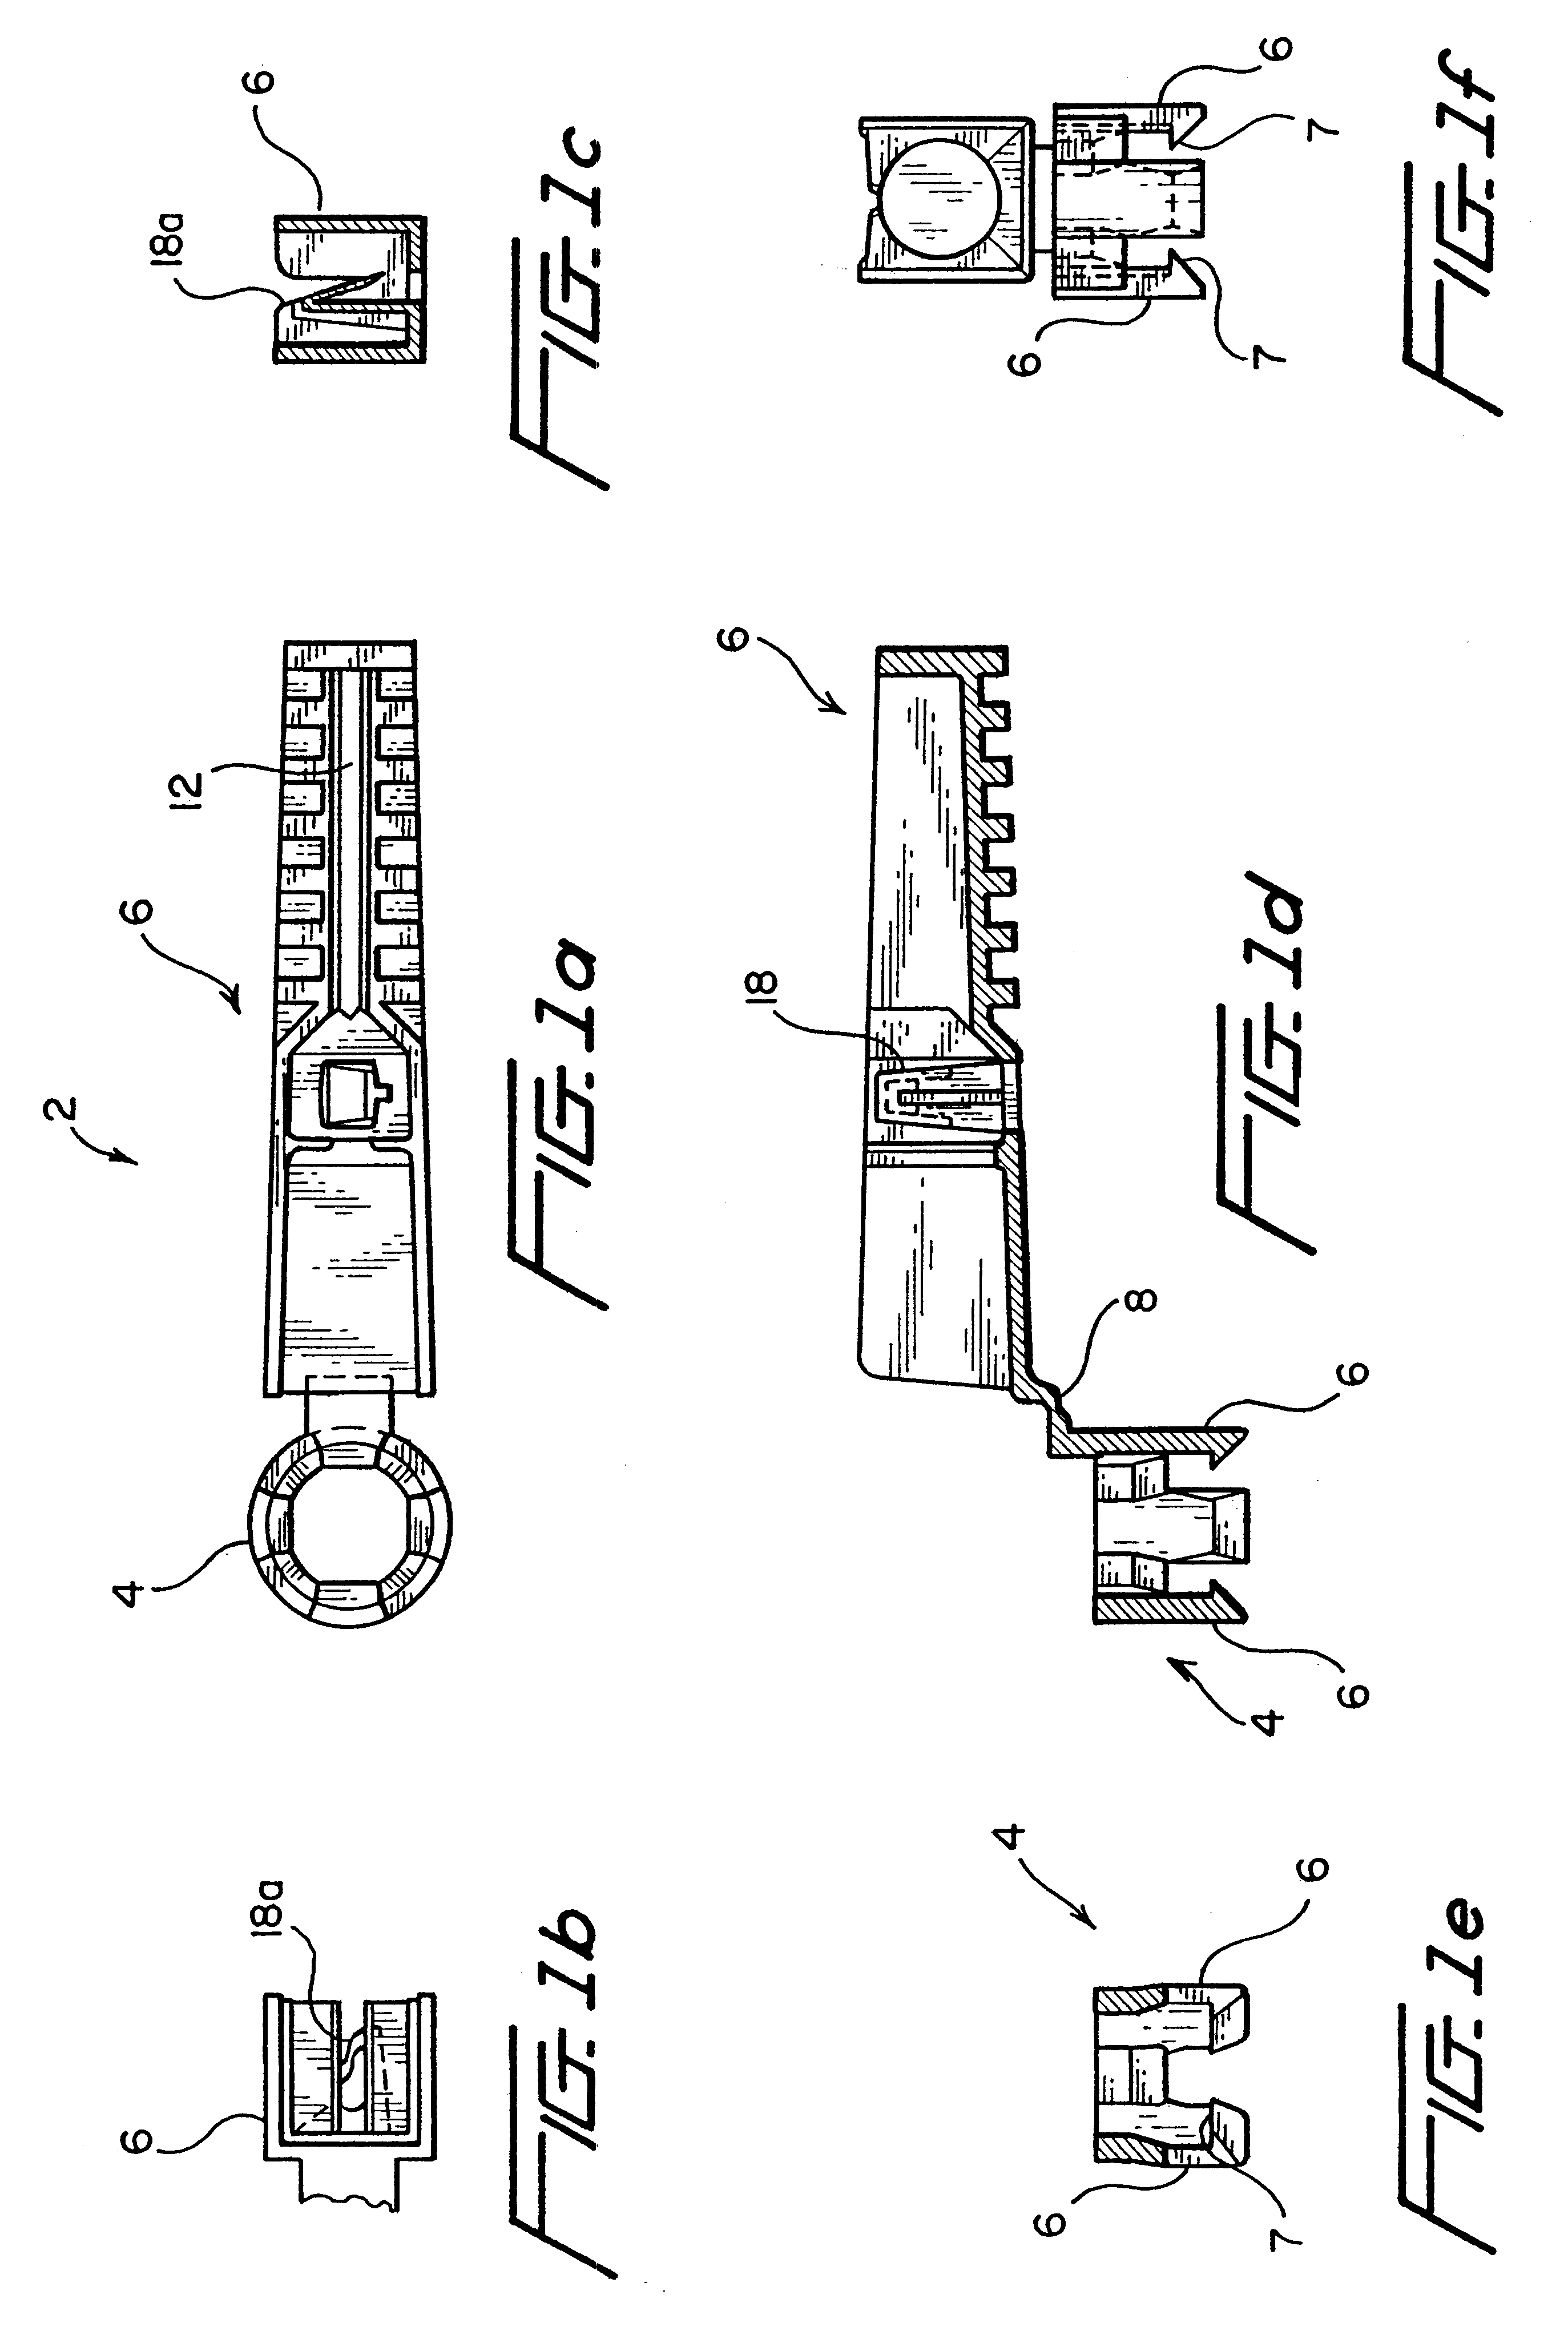 Needle protection apparatus used with a vial